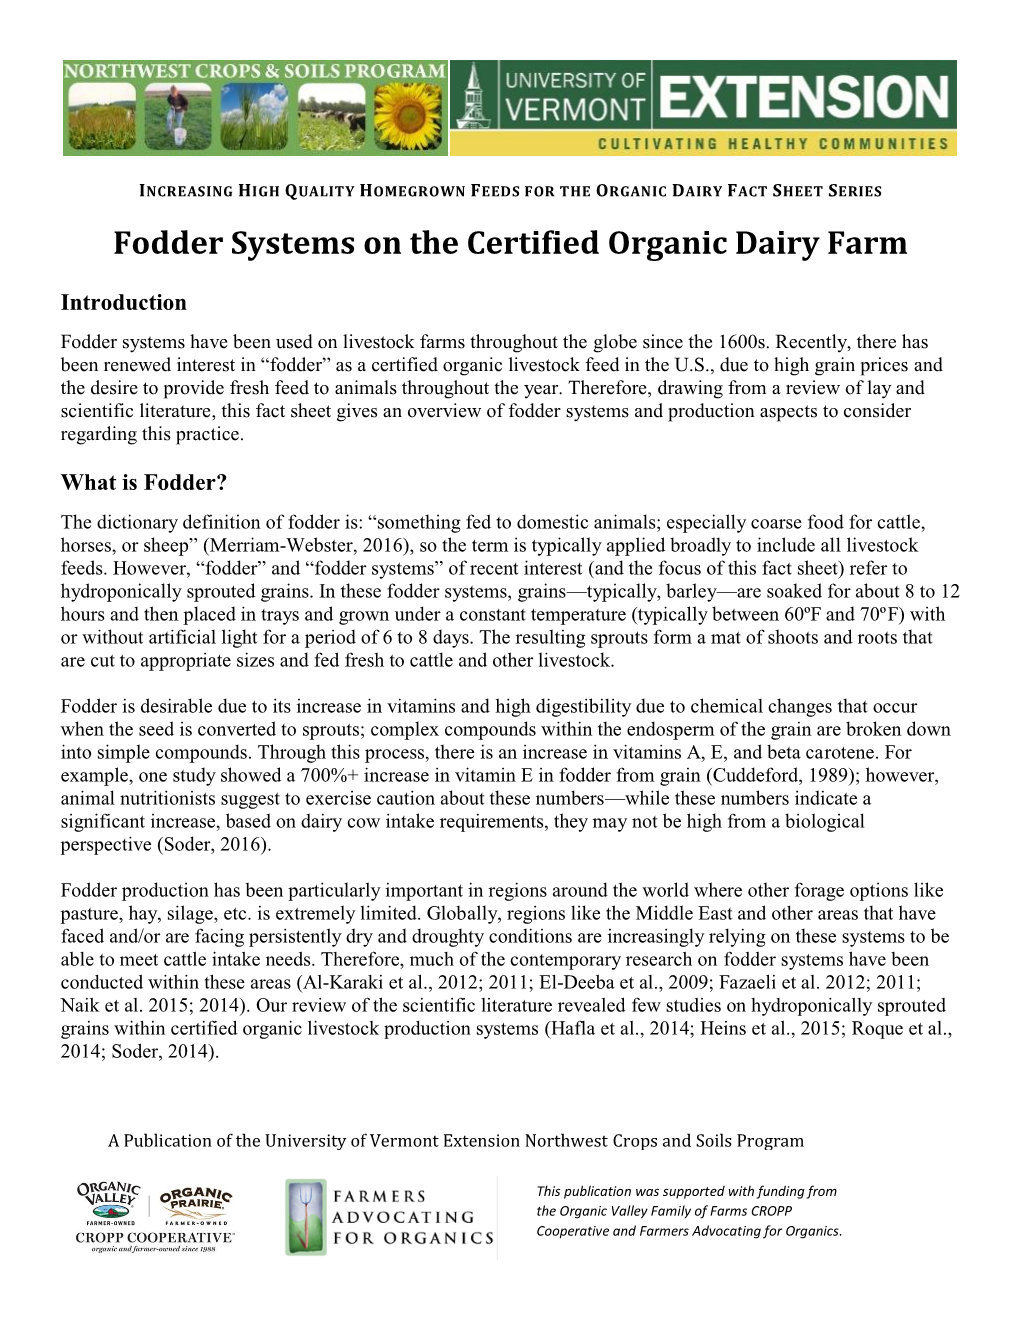 Fodder Systems on the Certified Organic Dairy Farm (Pdf)